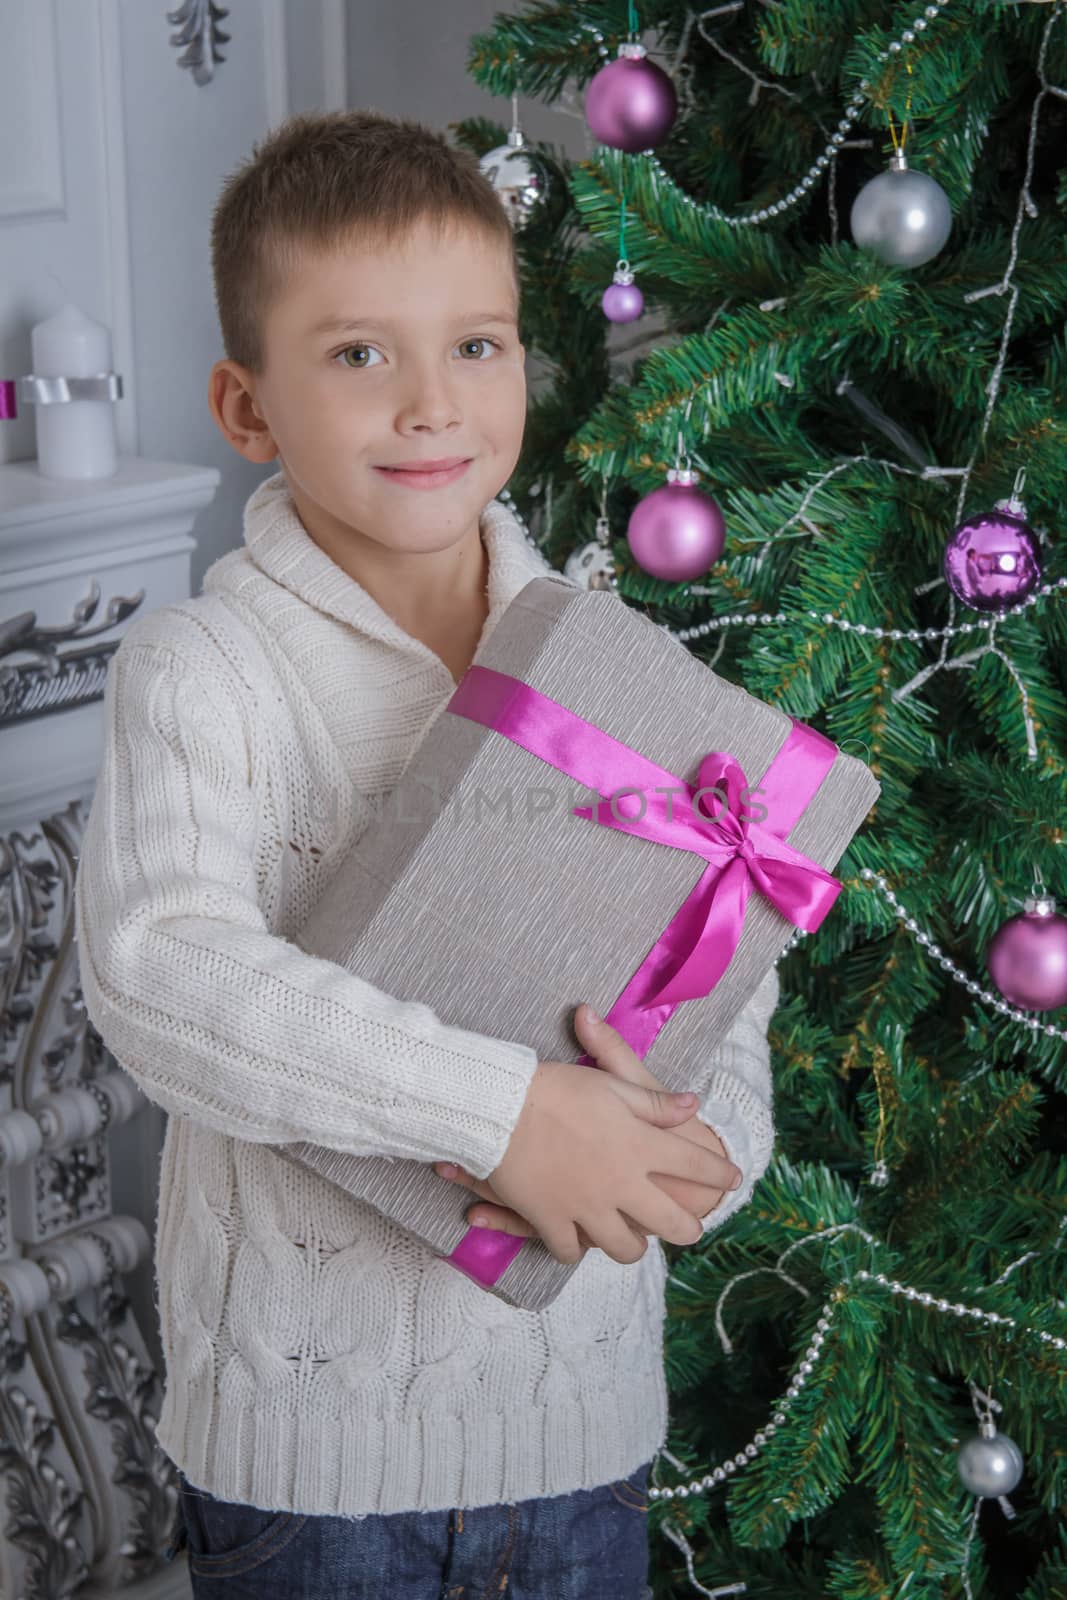 Boy with Christmas gift near decorated treee by Angel_a